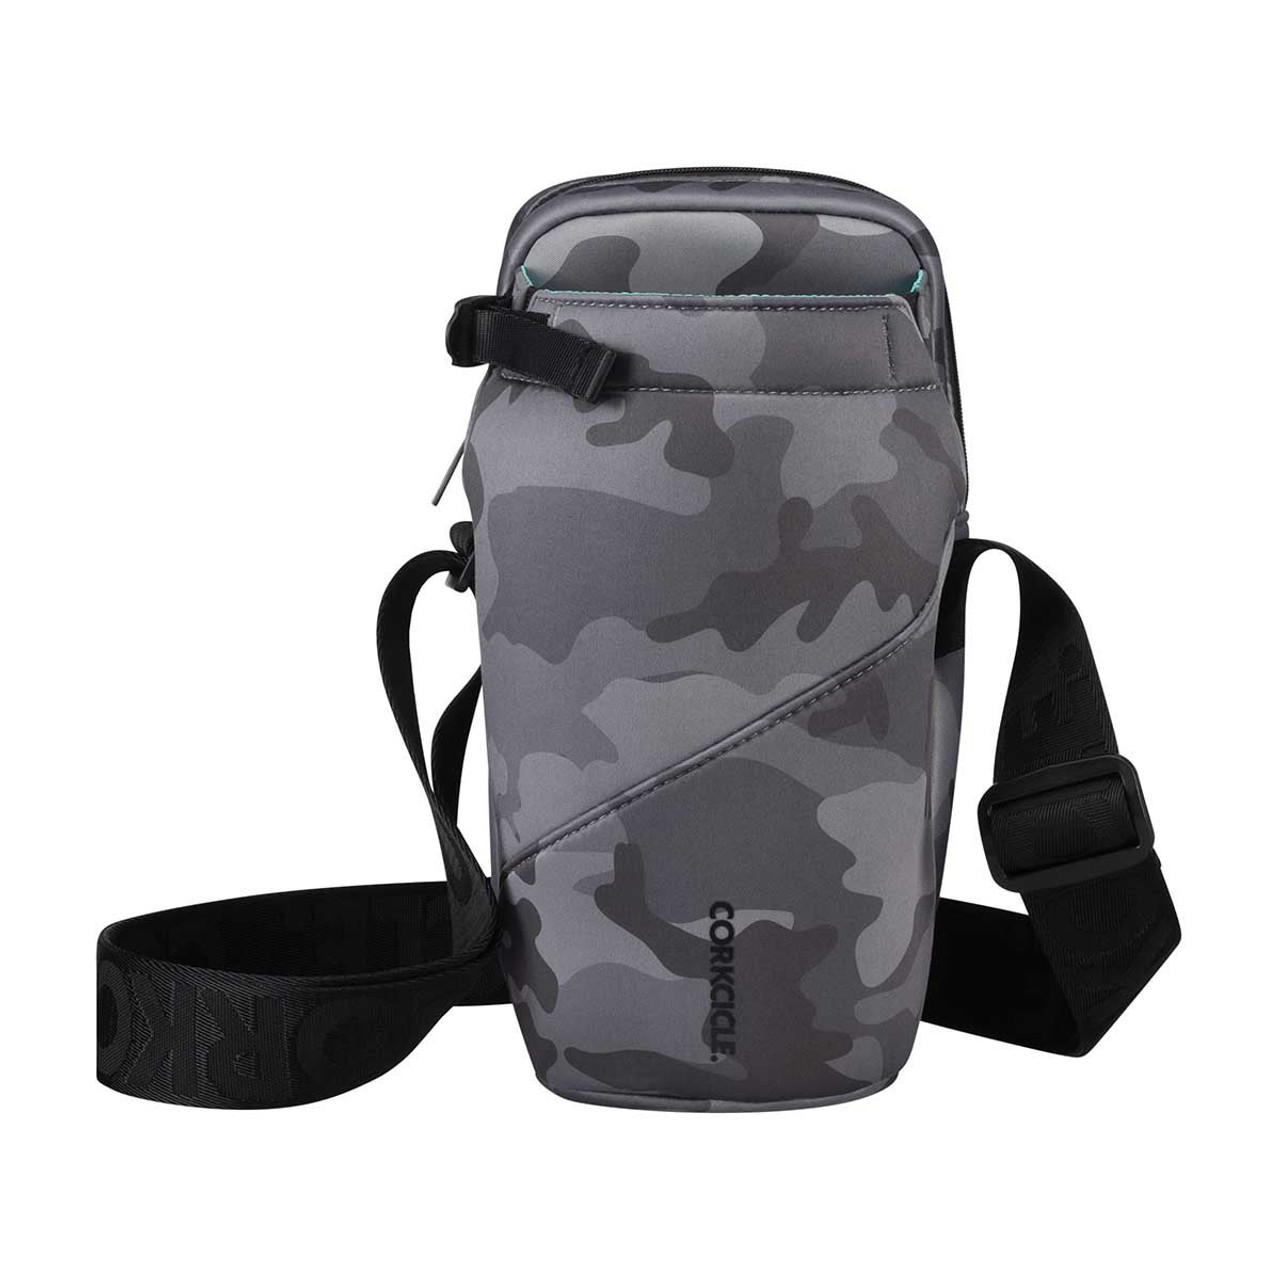 https://cdn11.bigcommerce.com/s-6zwhmb4rdr/images/stencil/1280x1280/products/125316/261498/the-lamp-stand-corkcicle-grey-camo-sling-92S-W22-GCN__16910.1652842420.jpg?c=1